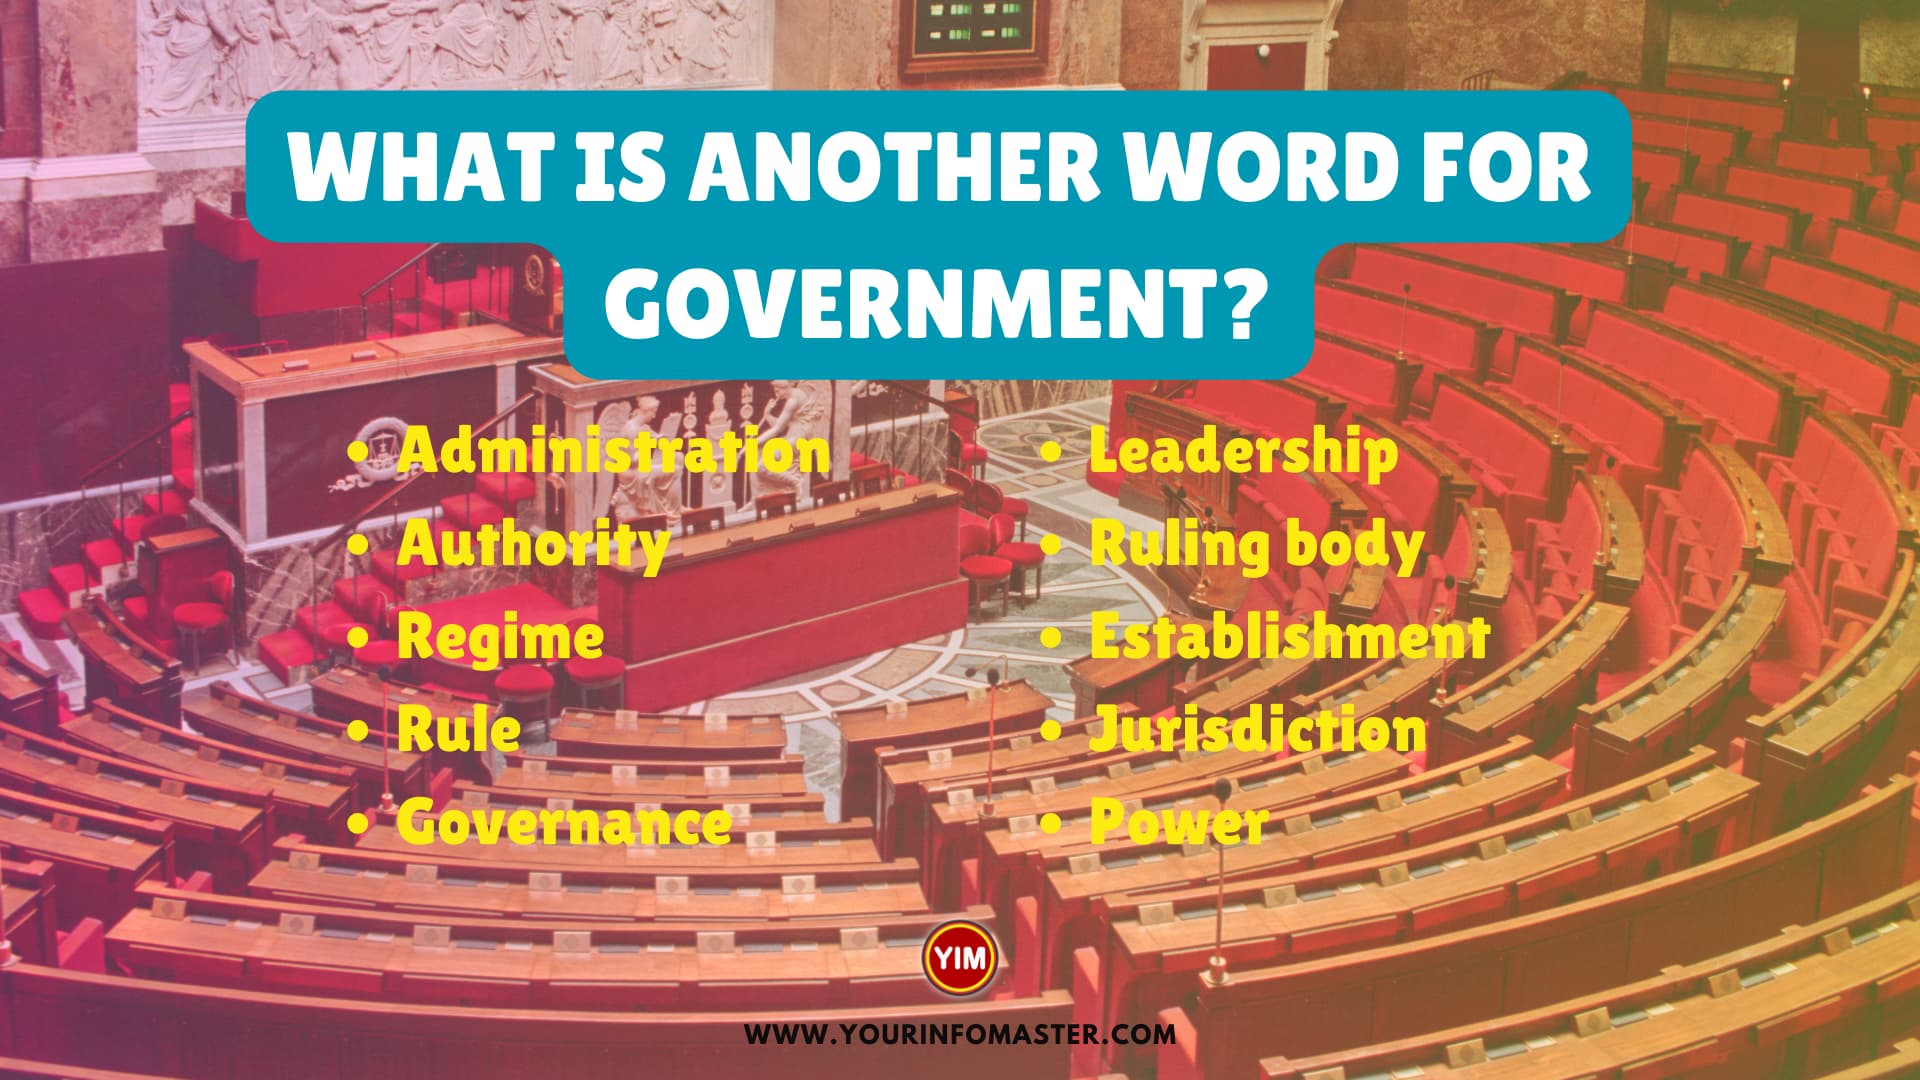 What is another word for Government